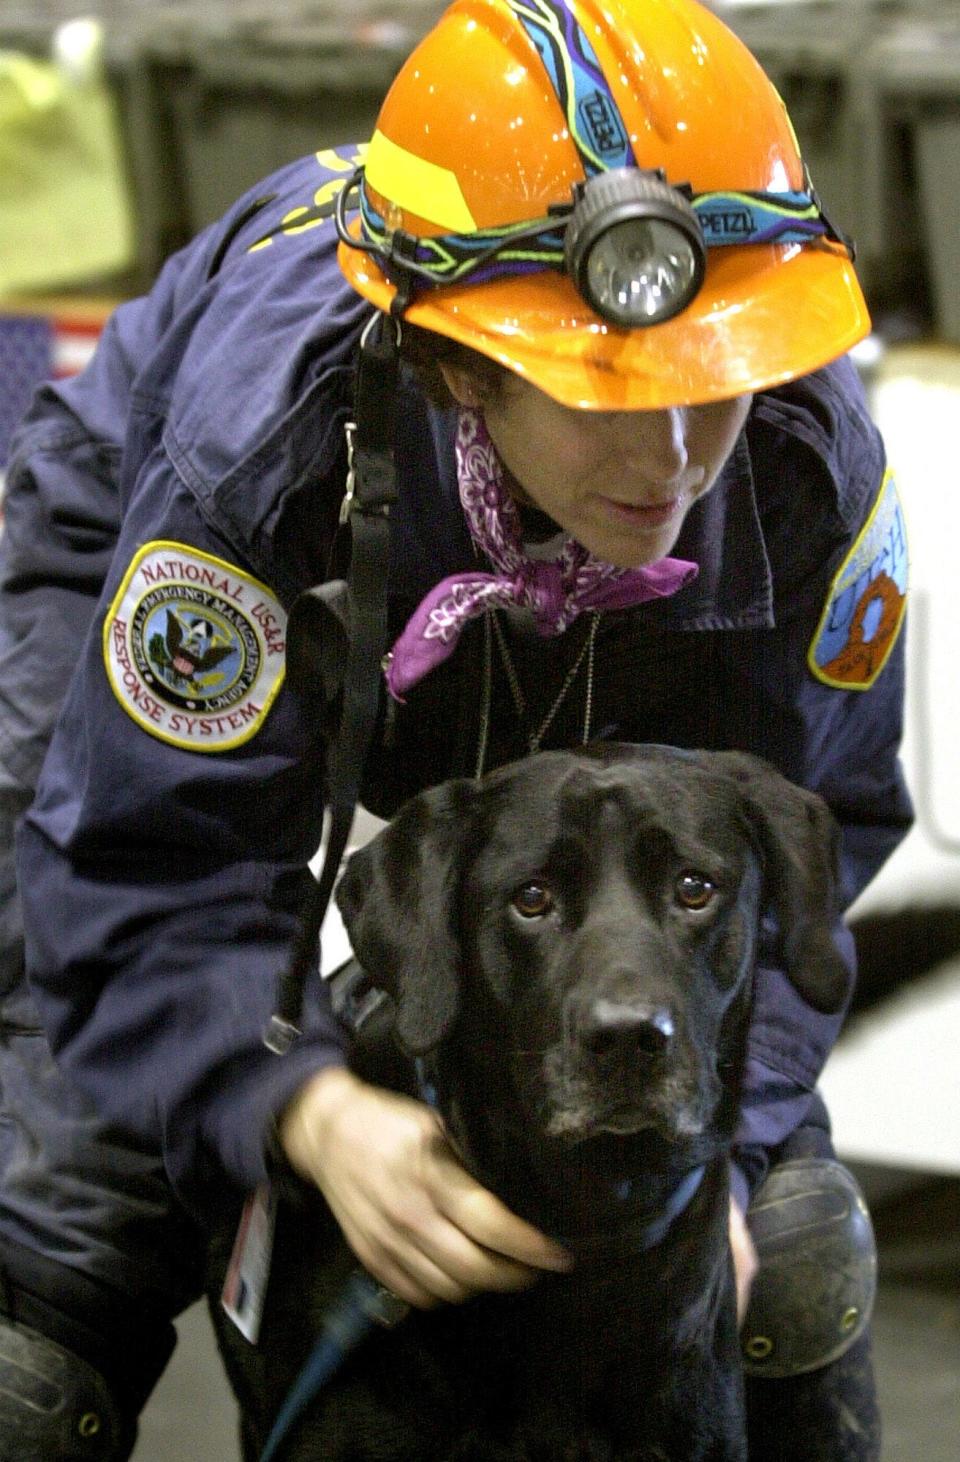 Mary Flood leashes her black Labrador retriever search and rescue dog, Jake, near the World Trade Center in New York in this Sept. 22, 2001 file photo.